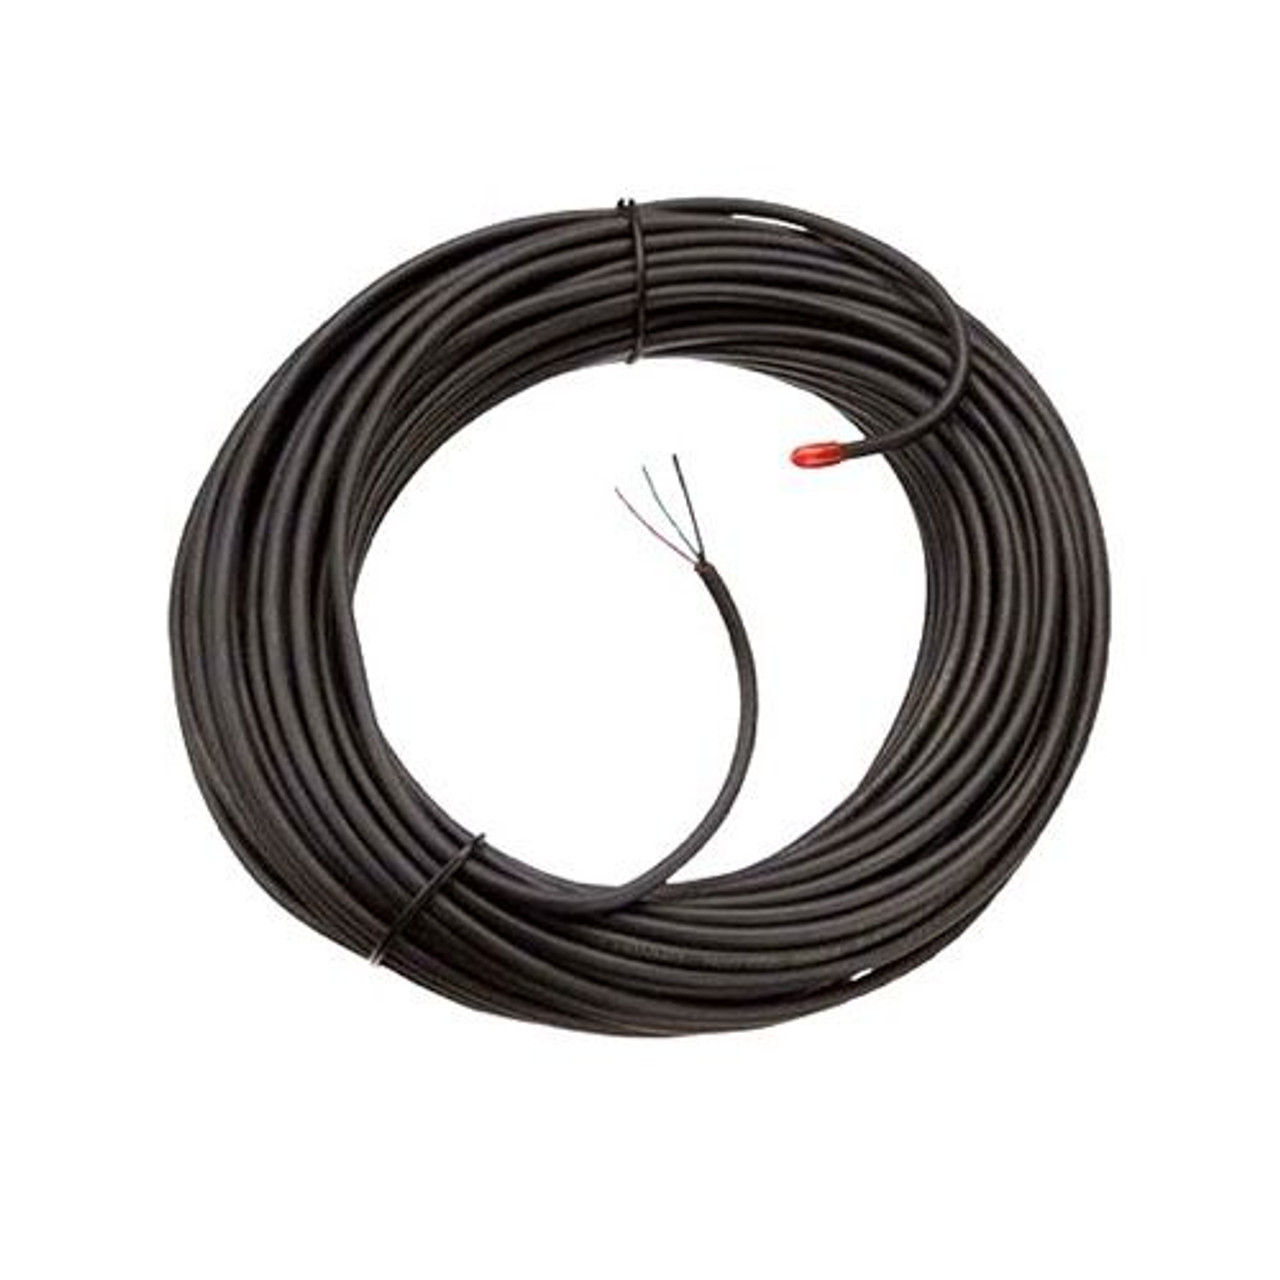 Channel Master CM3064 75' FT Antenna Rotor Control Cable 3 Conductor 22 AWG Wire Round Rotator Antenna Automatic 22 Gauge TV Rotator Cable for CM9521, Part # CM-3064